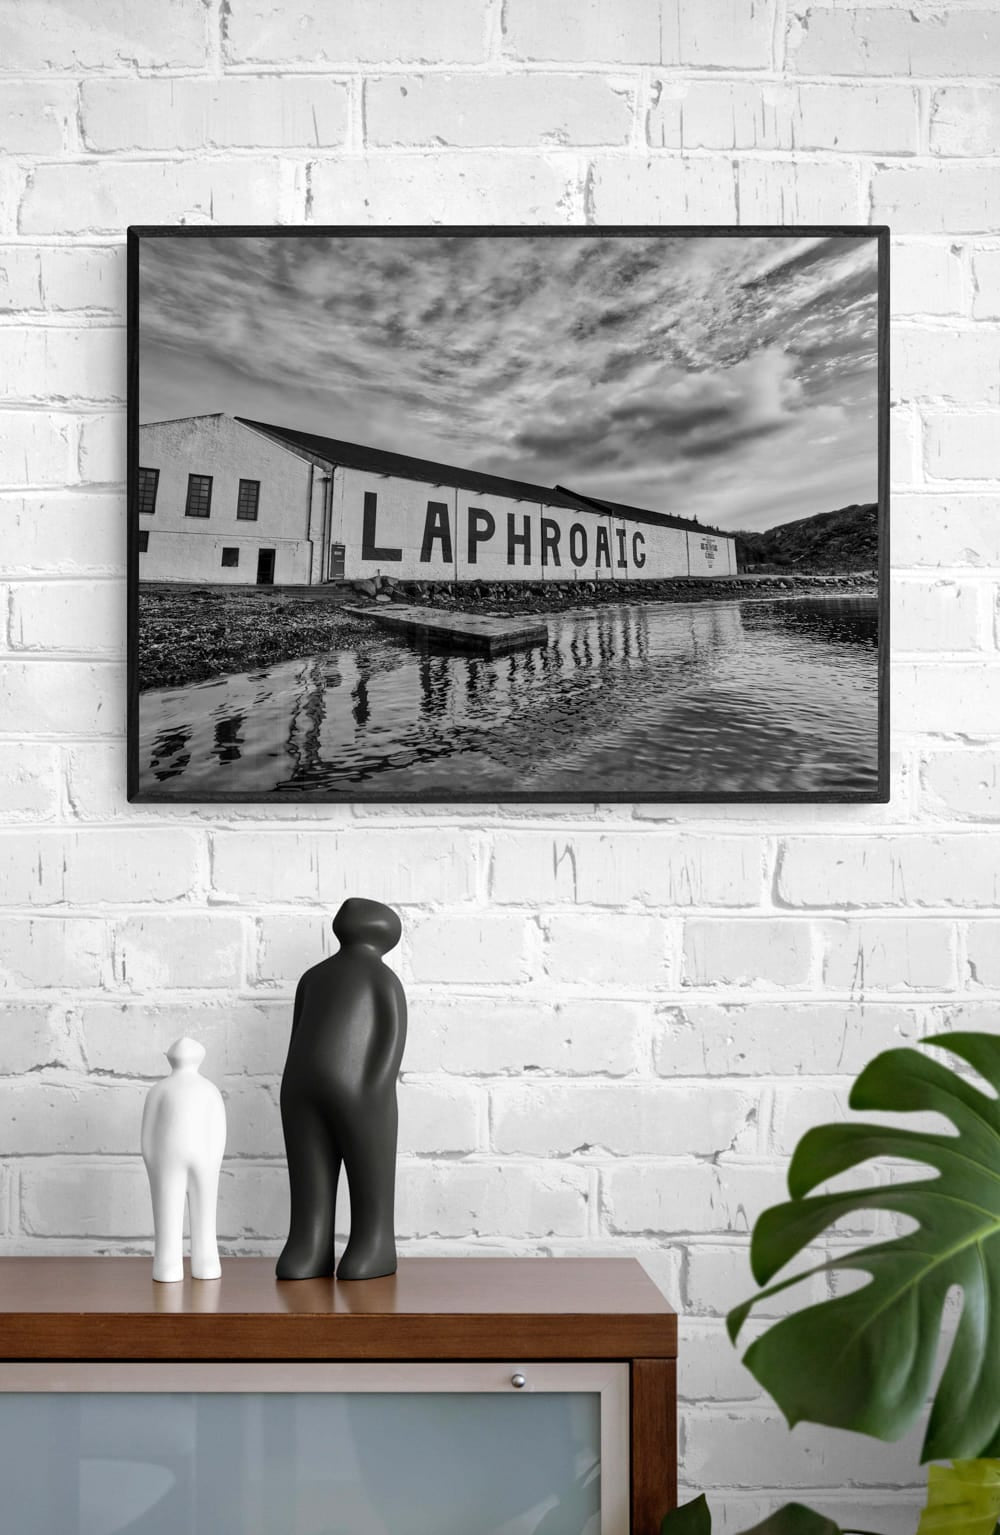 black and white statues looking up at a black and white framed photograph of laphroaig distillery warehouse with Laphroaig painted on side of building